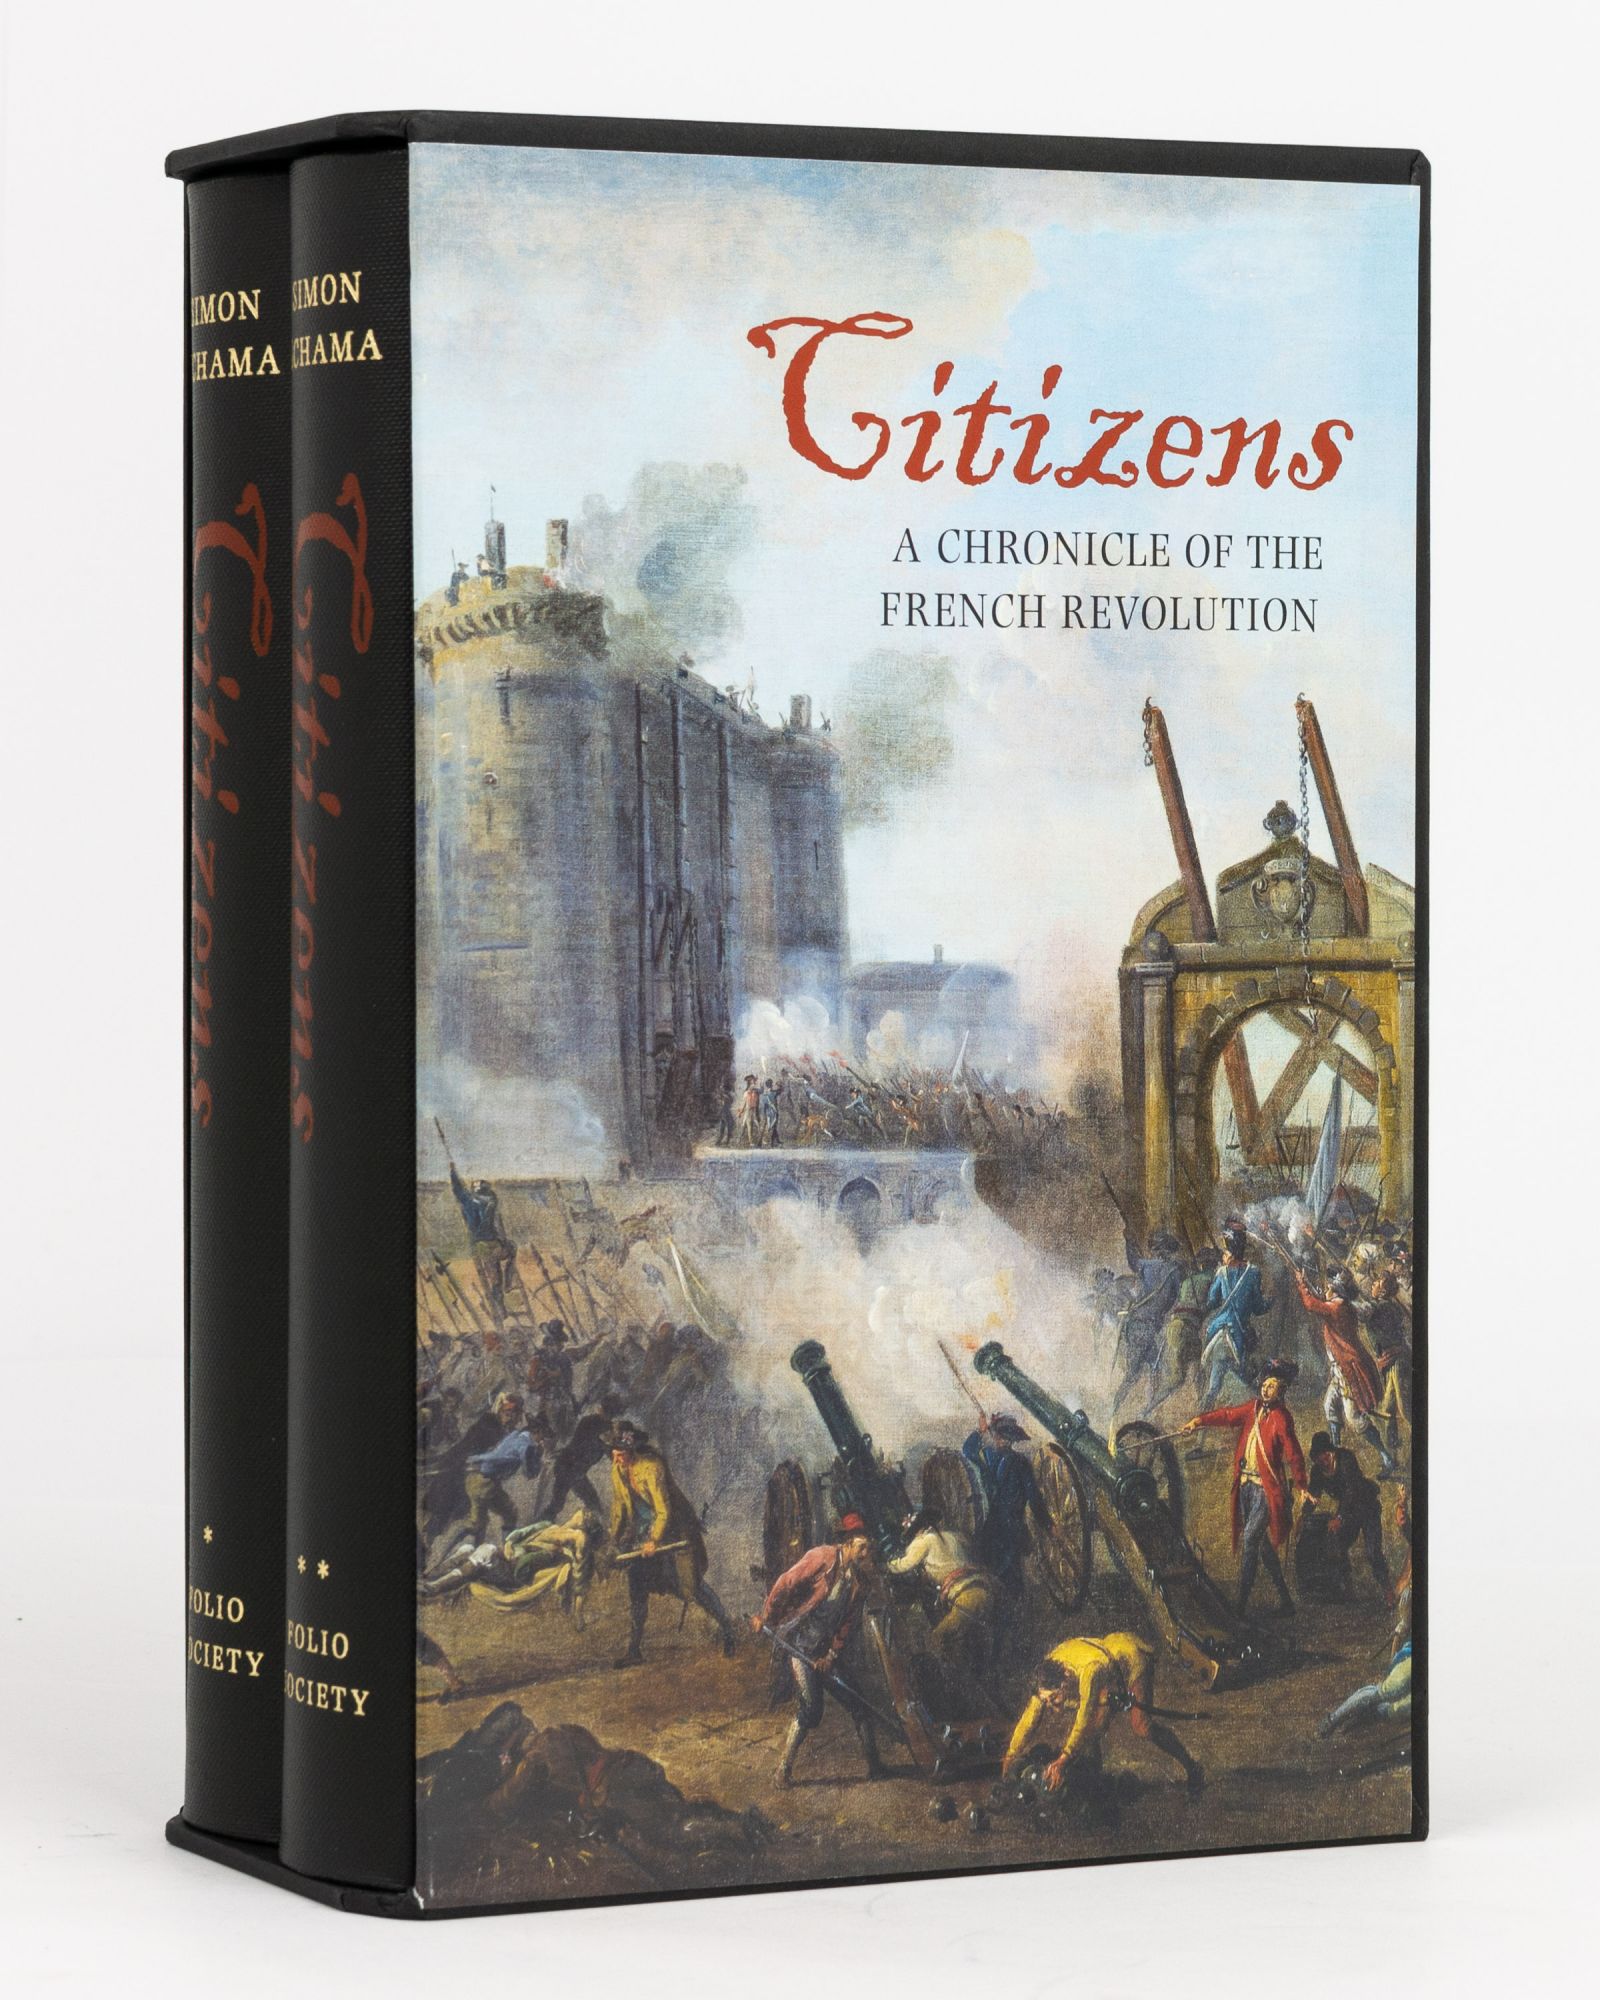 the　Citizens.　Simon　Revolution　Chronicle　A　French　of　SCHAMA